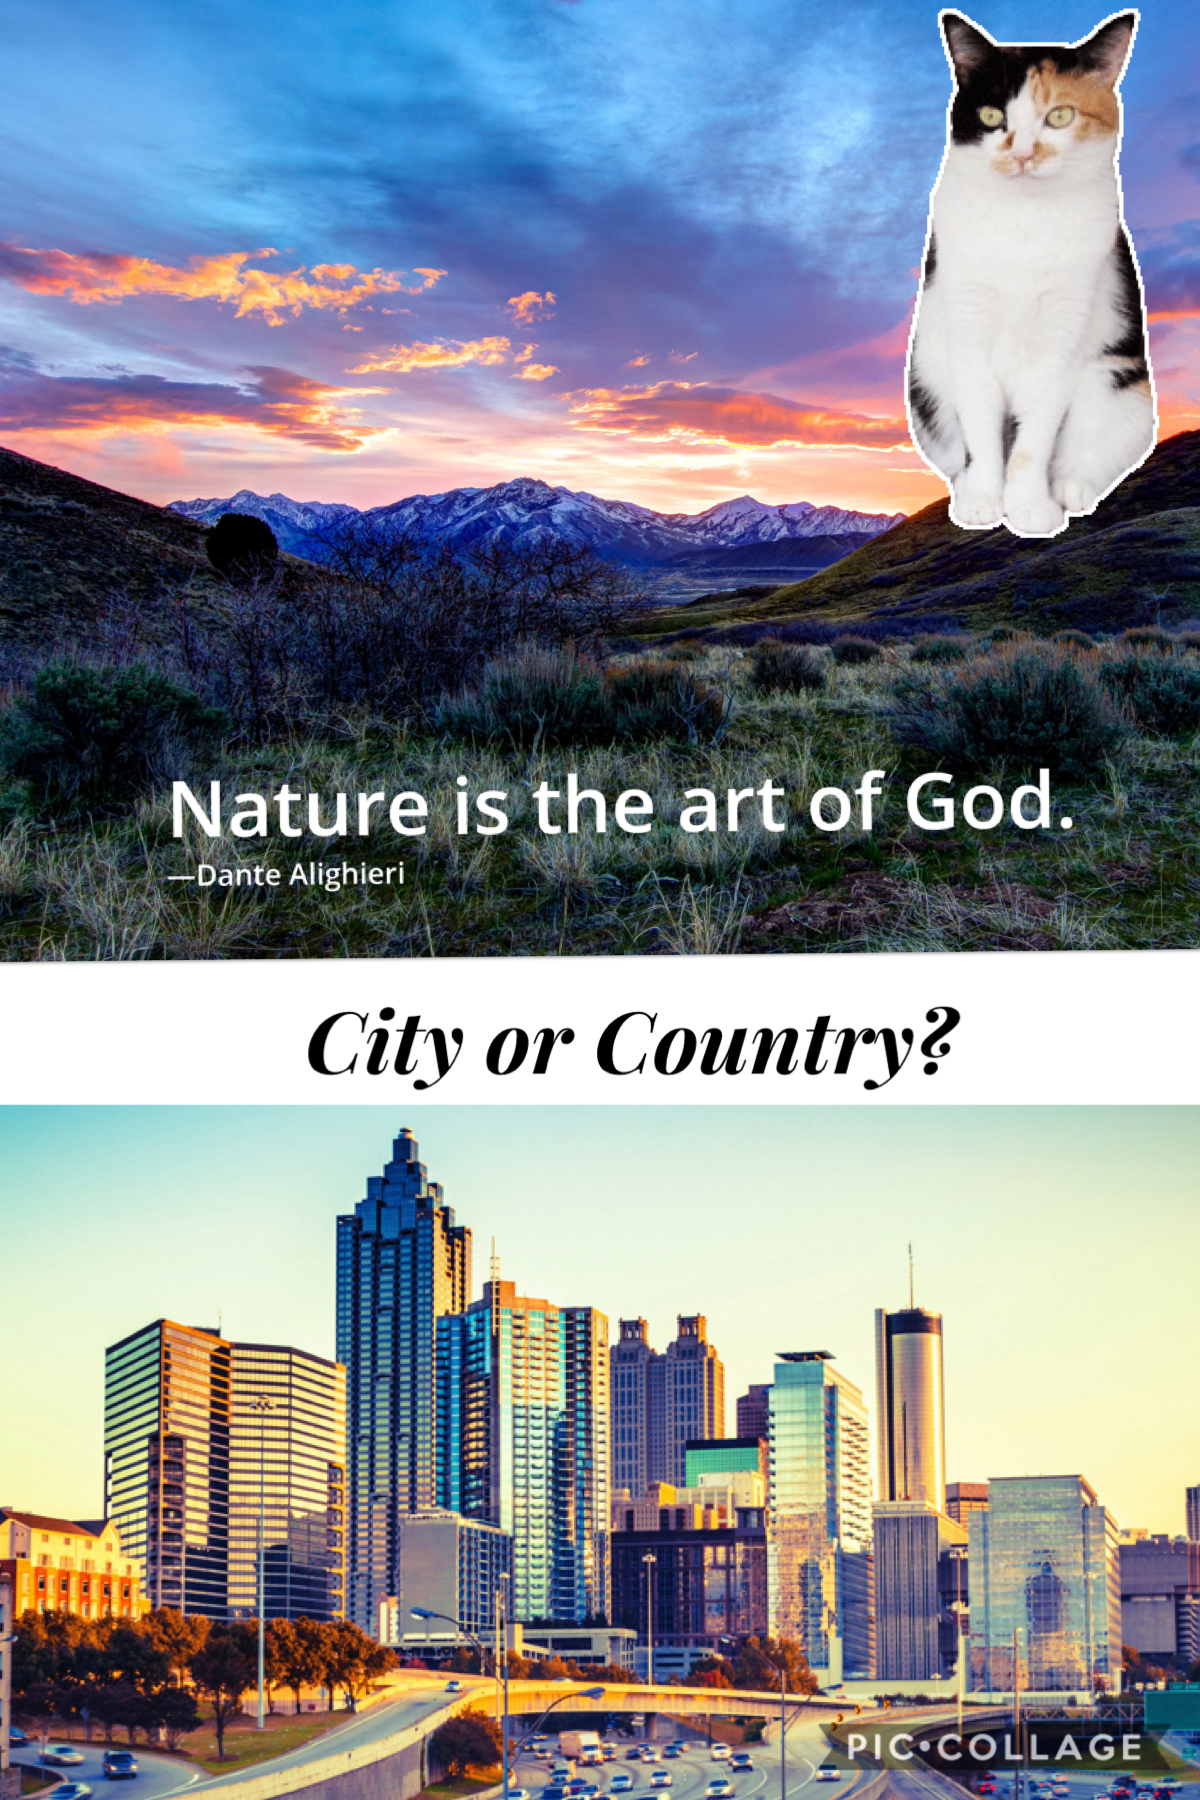 City or Country? Either way, God loves you! ❤️❤️❤️